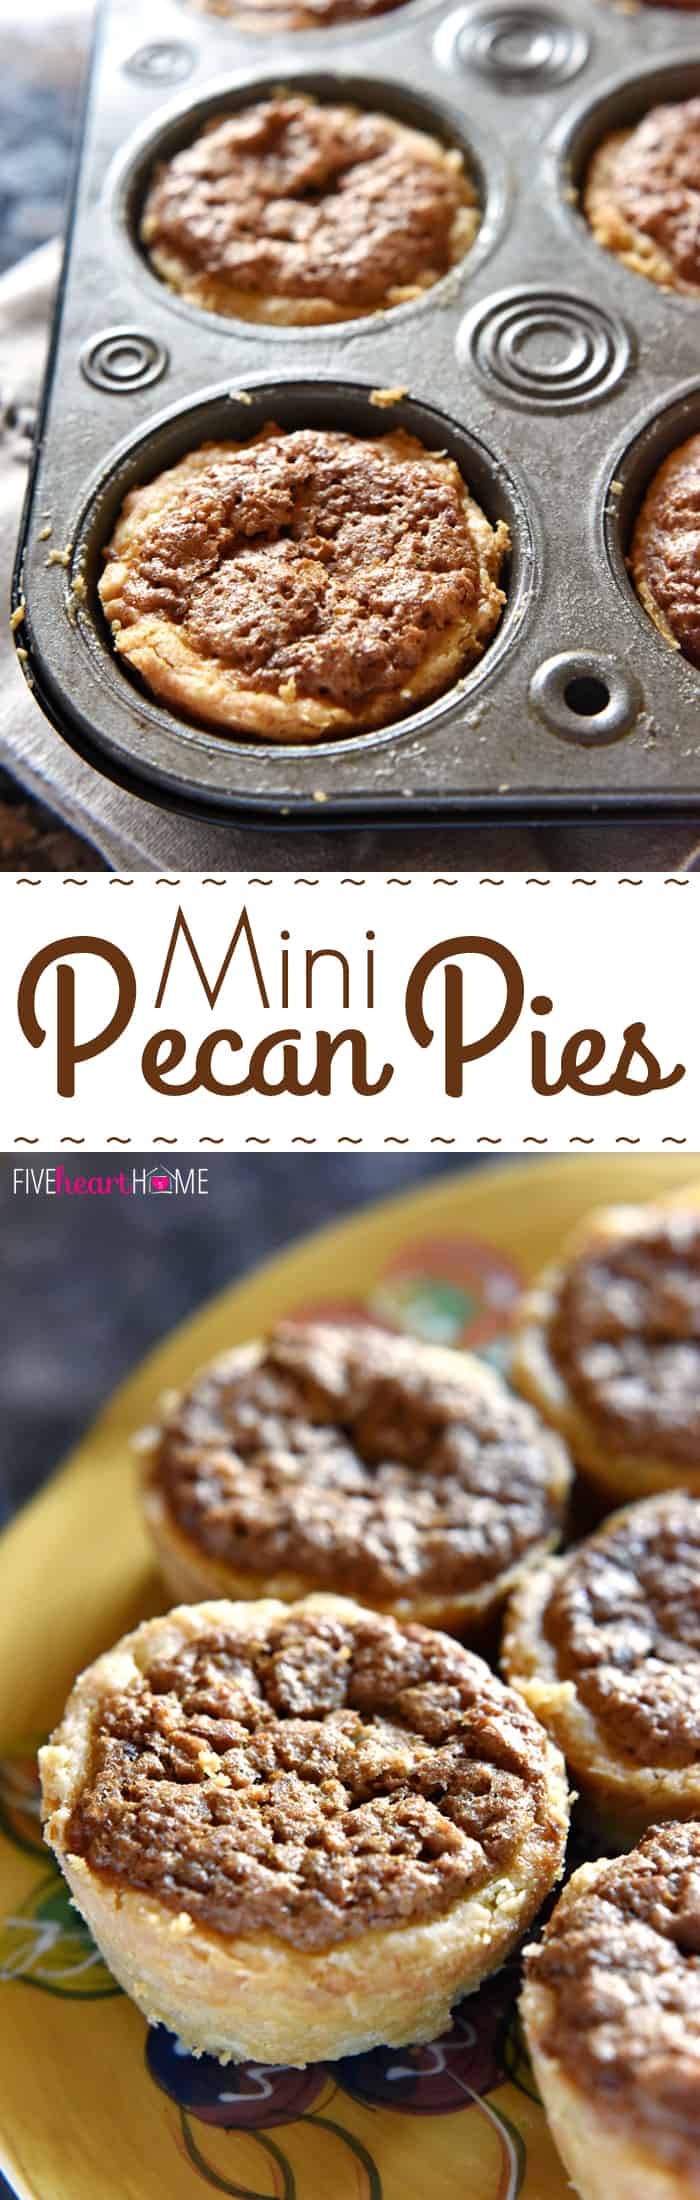 Mini Pecan Pies Collage with Text Overlay 